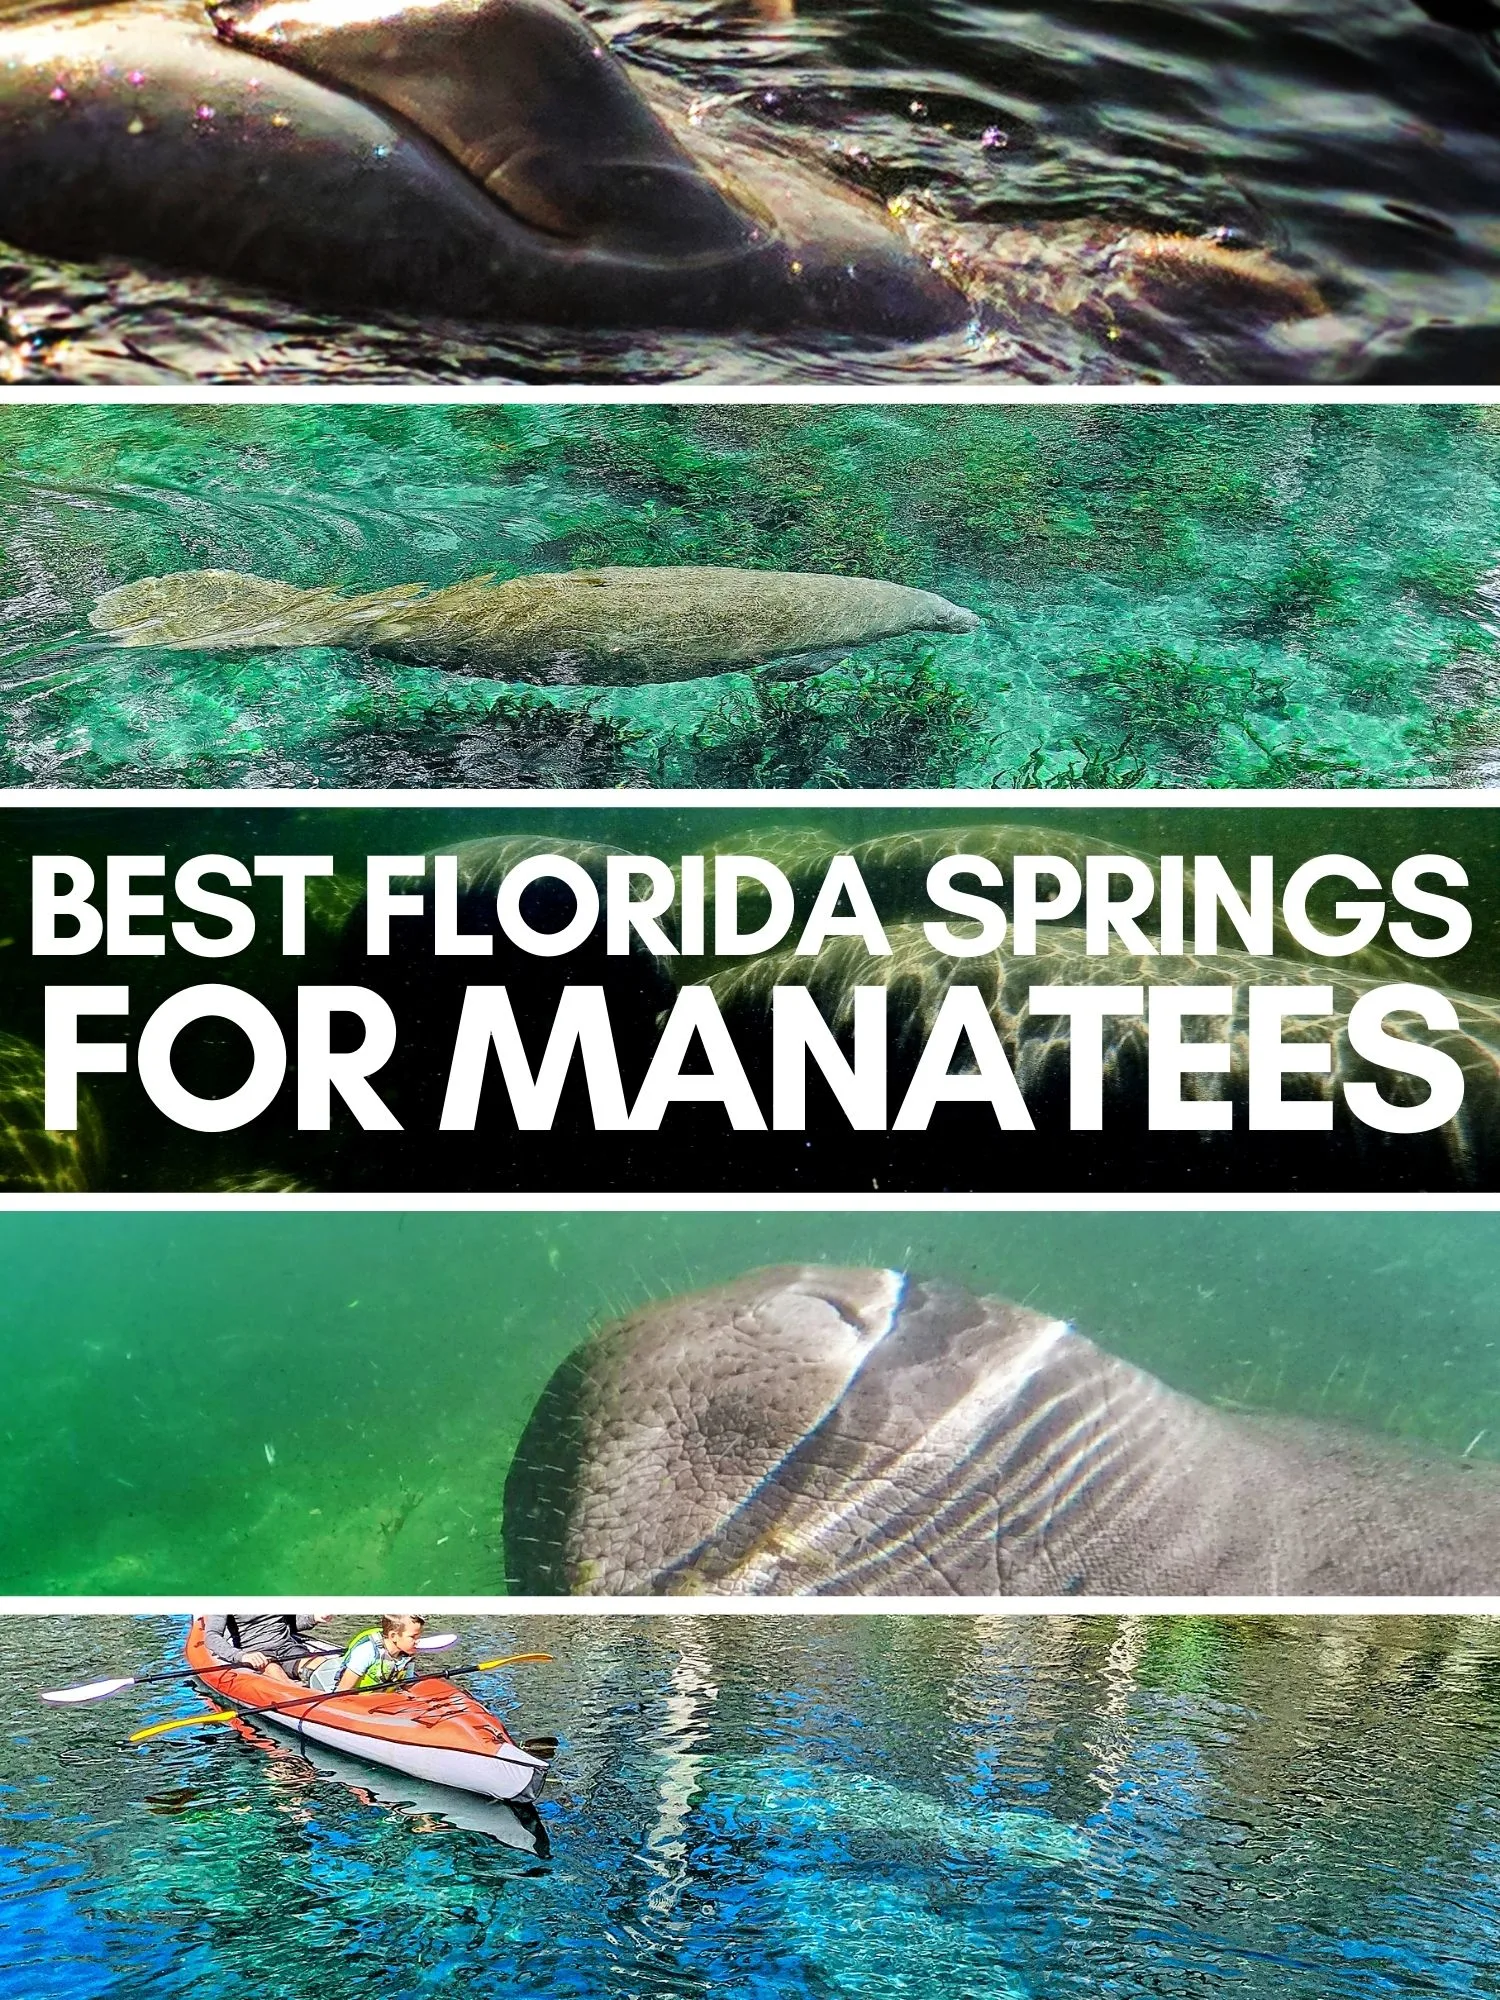 Manatees are a Florida bucket list experience. These are the best fresh water springs to see manatees up close and enjoy crystal clear waters any time of year.